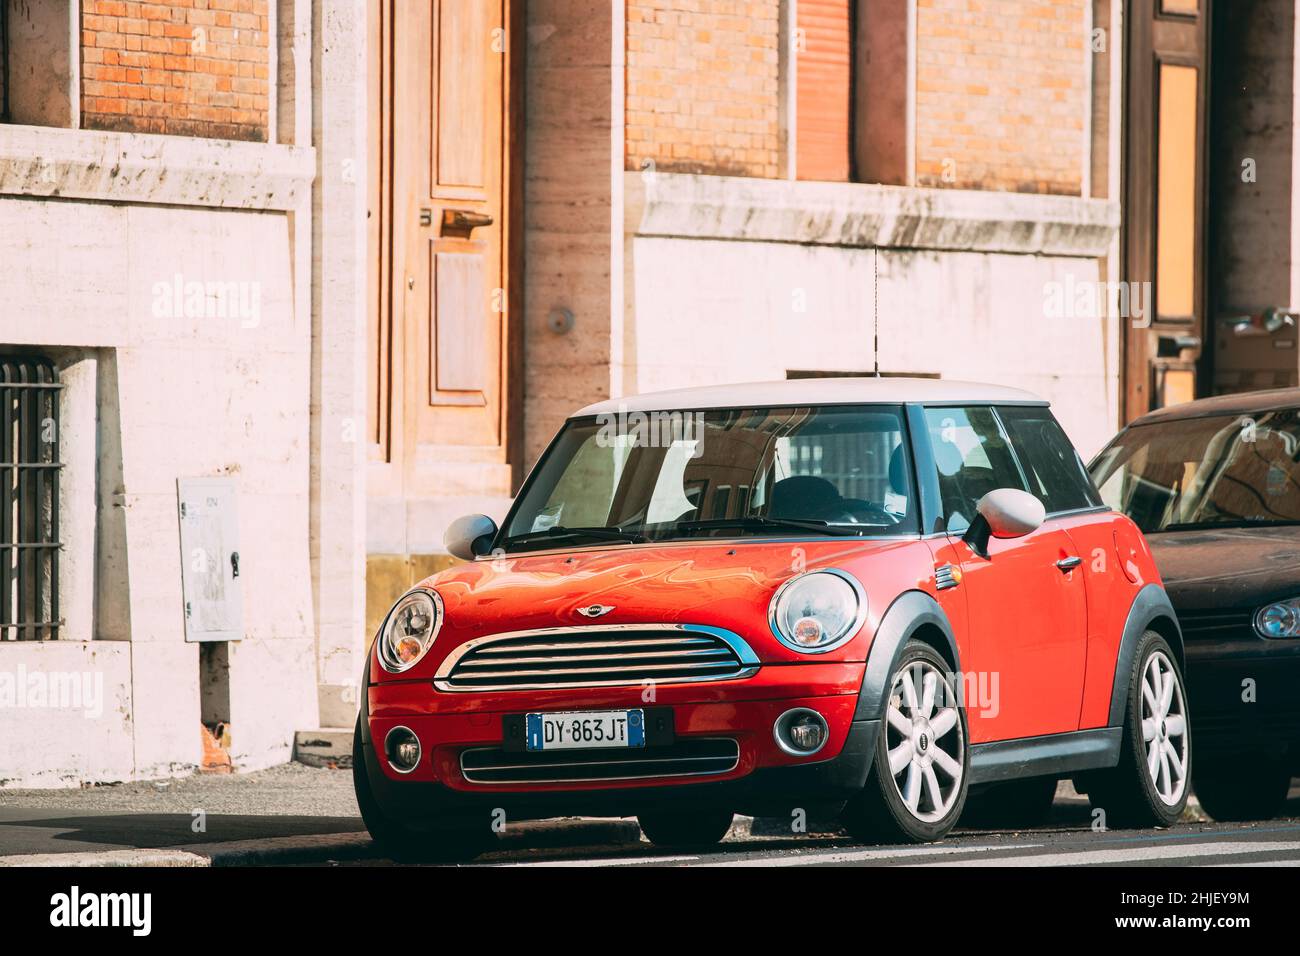 Rome, Italy. Red Mini Cooper Hatch Car Of Second Generation Parked At Street Stock Photo